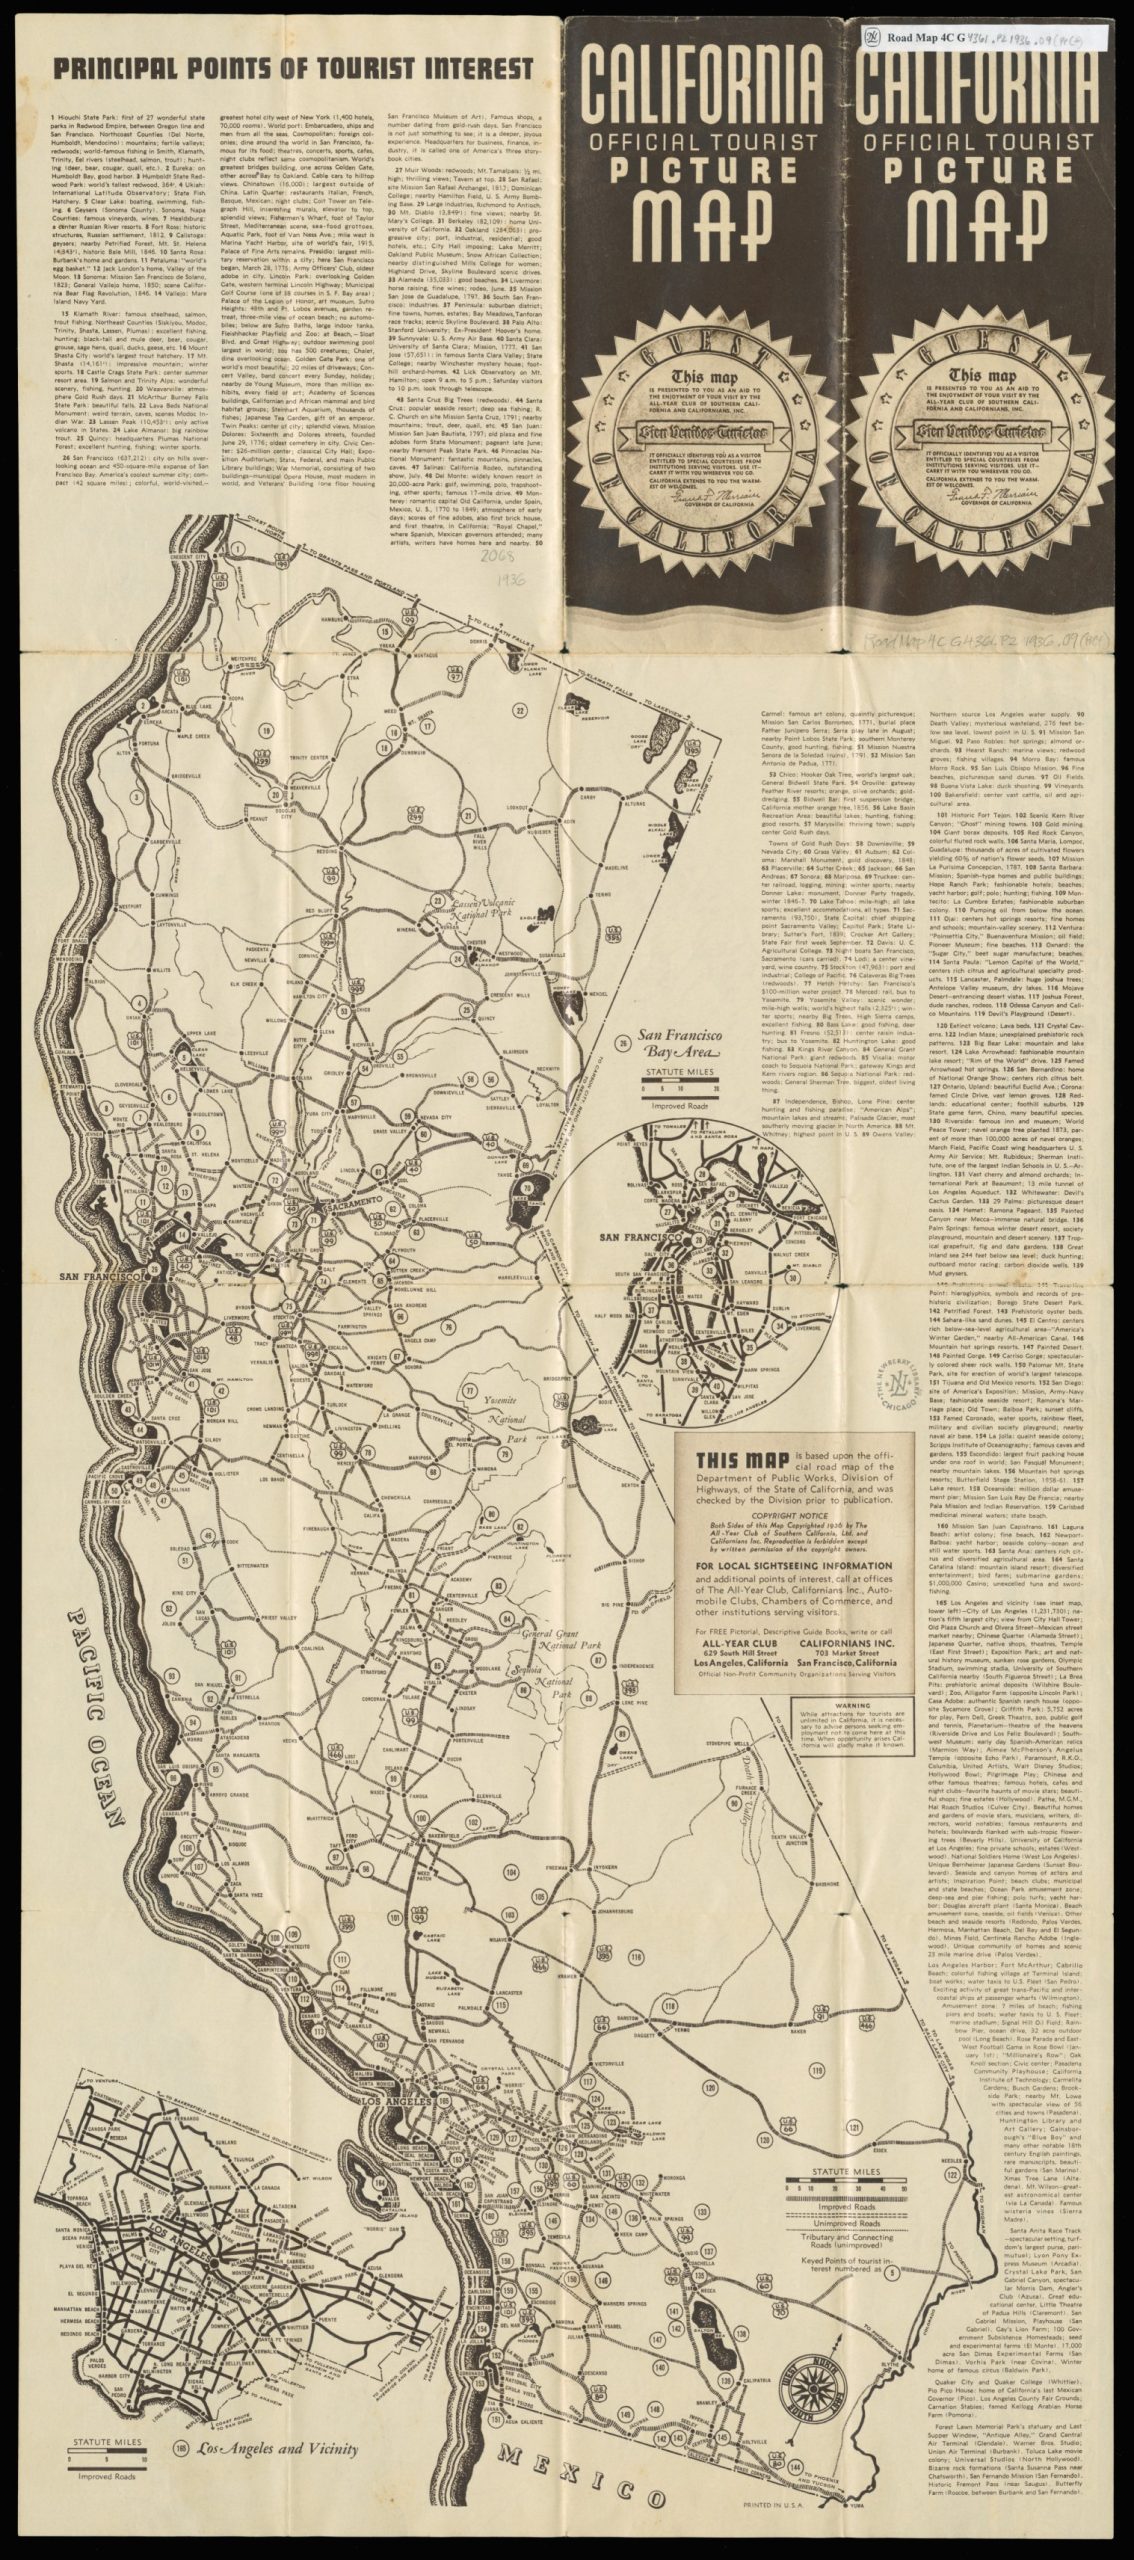 A black-and-white unfolded sixteen square brochure depicting a road map of the state of California alongside text describing "Principle Points of Tourist Interest."